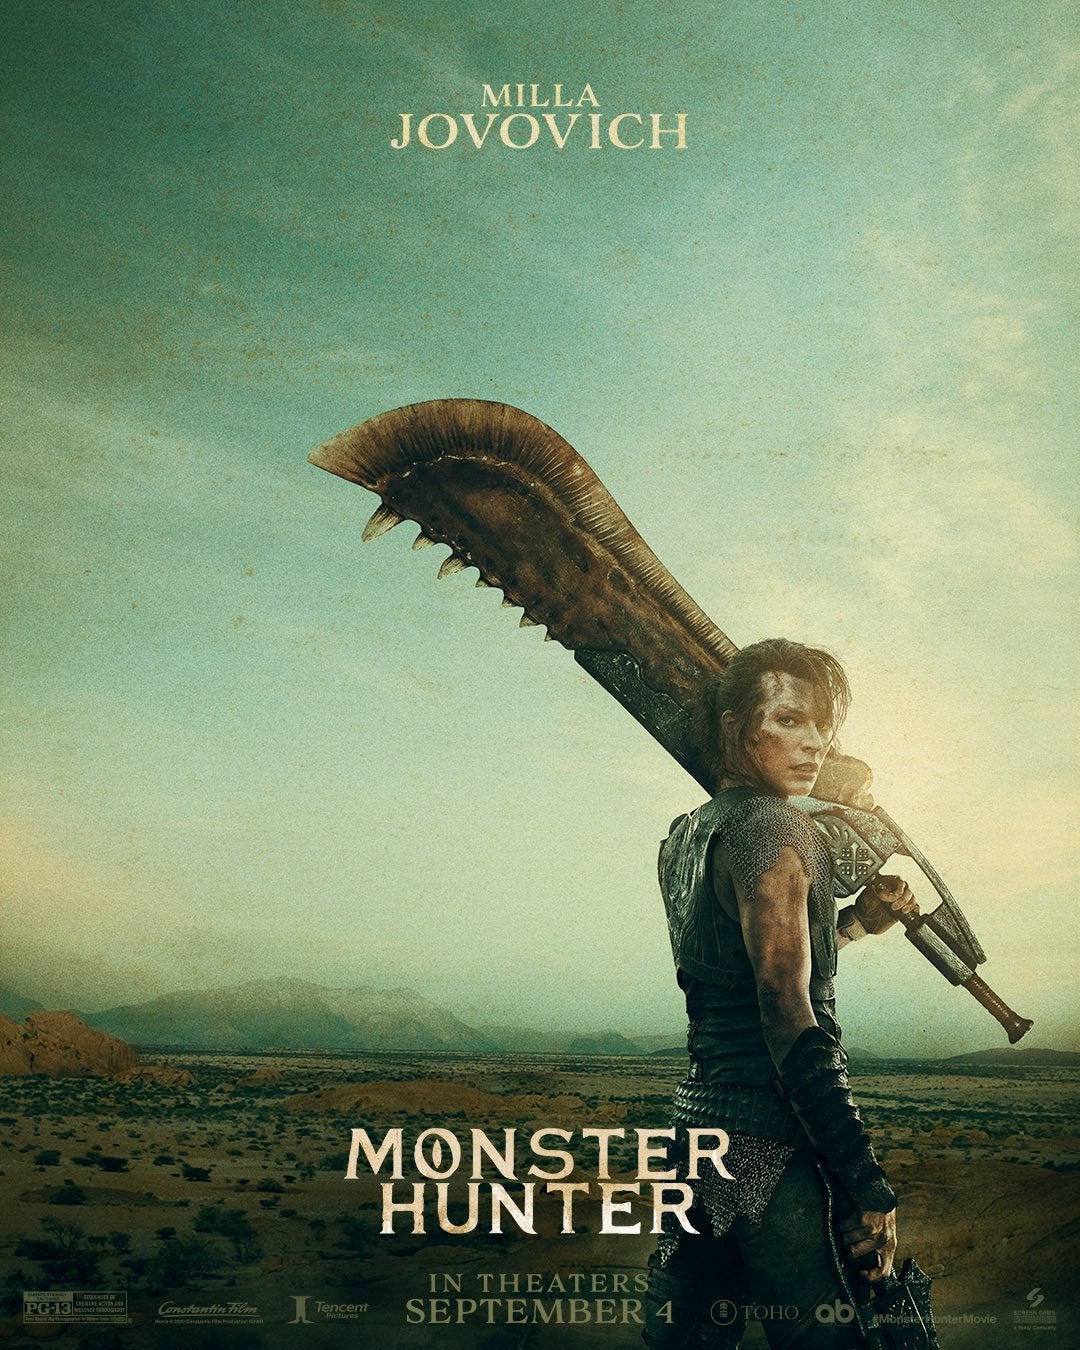 Image for Check out these Monster Hunter movie posters of Milla Jovovich and Tony Jaa